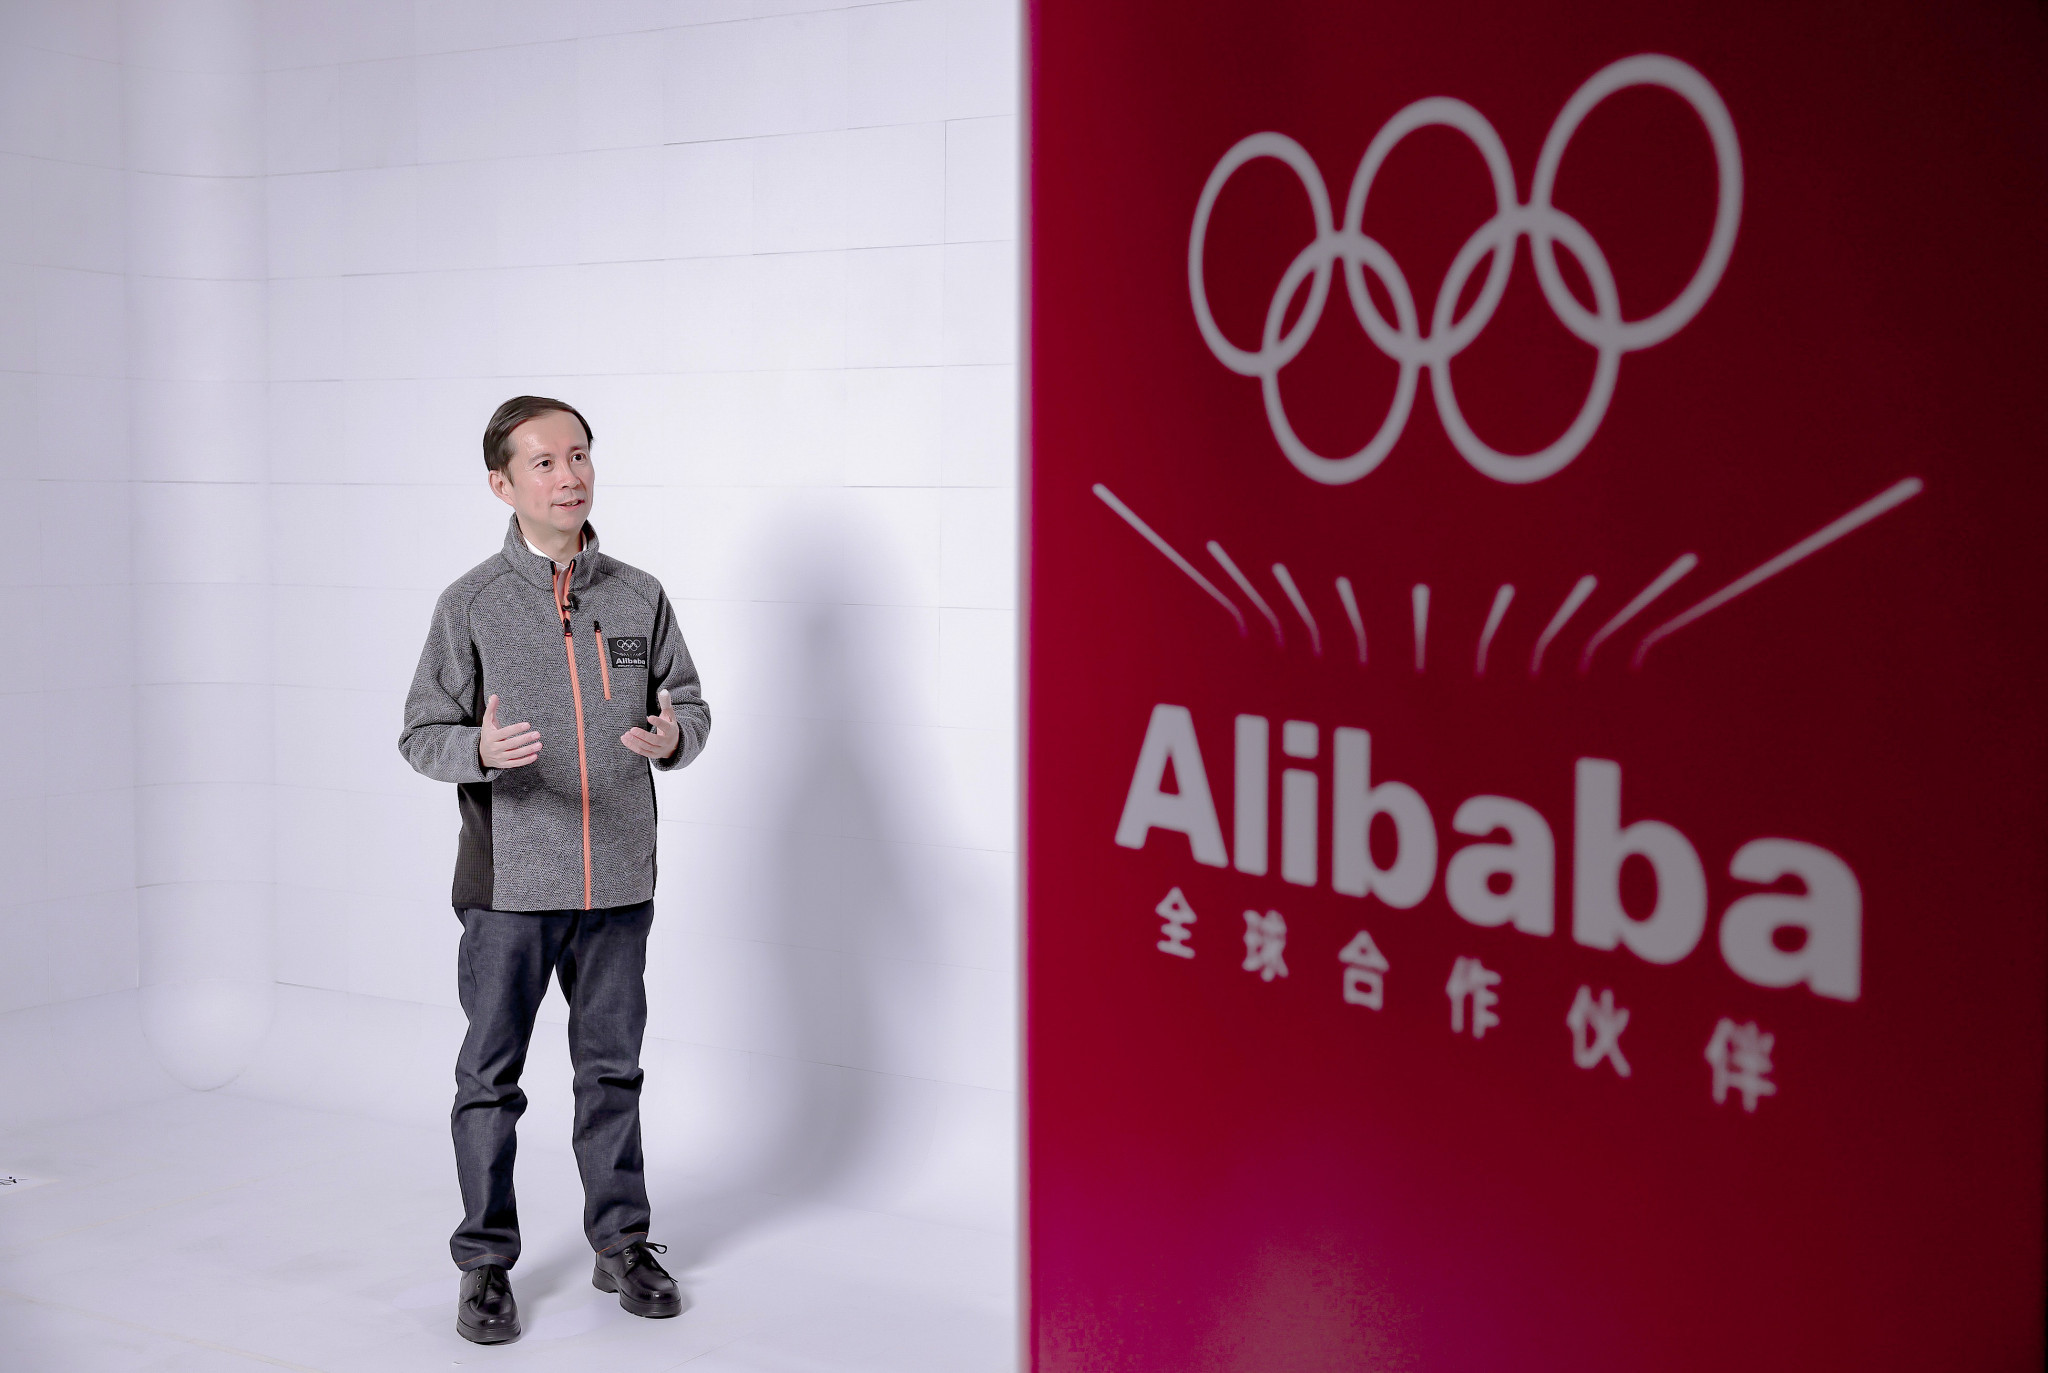 Alibaba Chief Executive Daniel Zhang at his office in Shanghai 1,000 kilometres away from the Olympic city of Beijing ©Alibaba